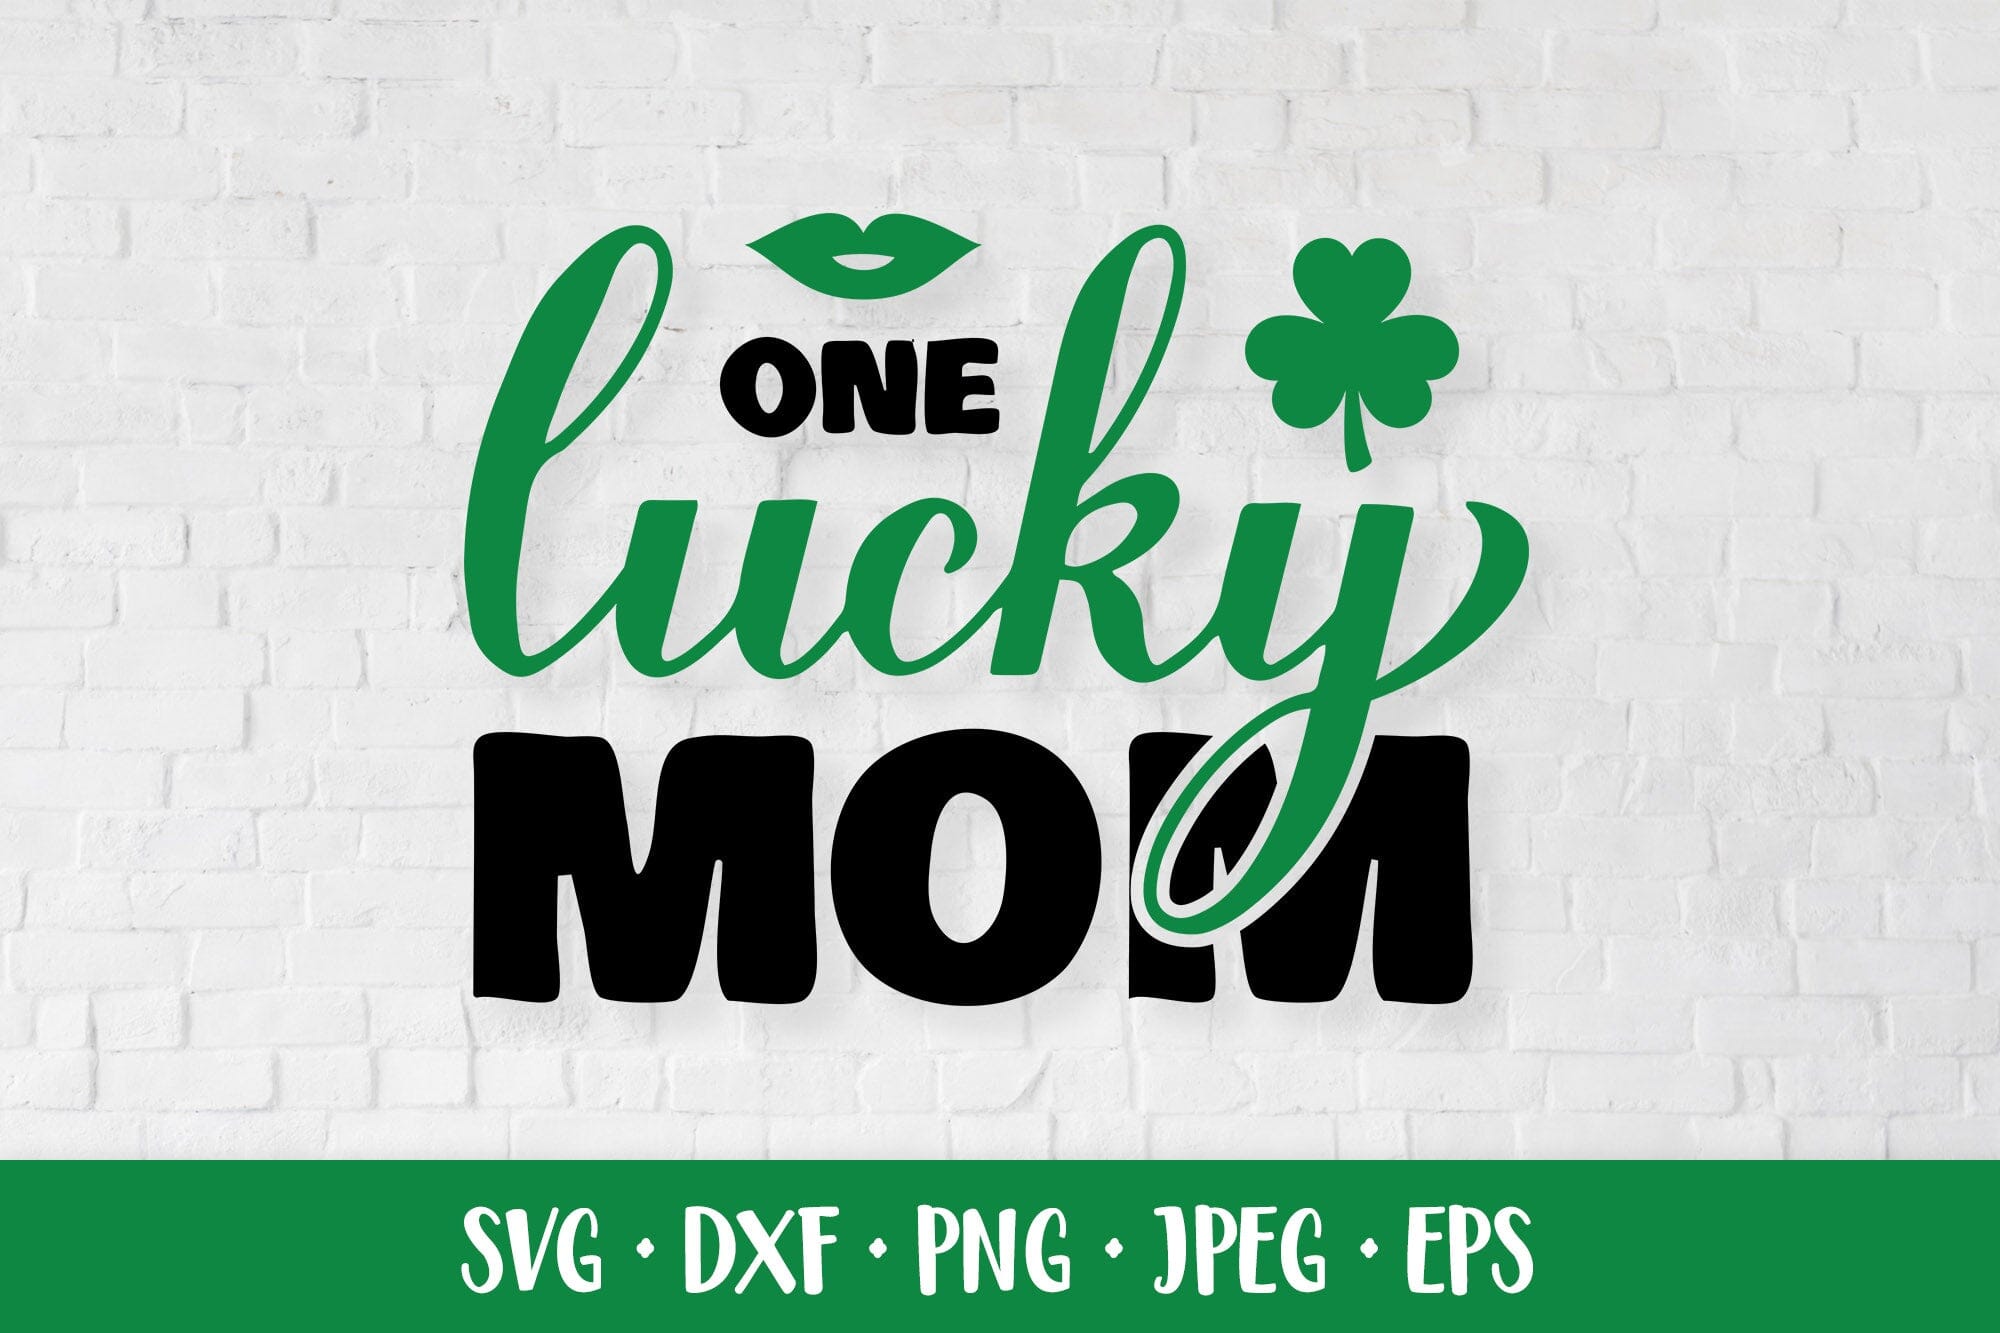 One Lucky Mama Svg Mama Patrick's Day Mother Svg St 